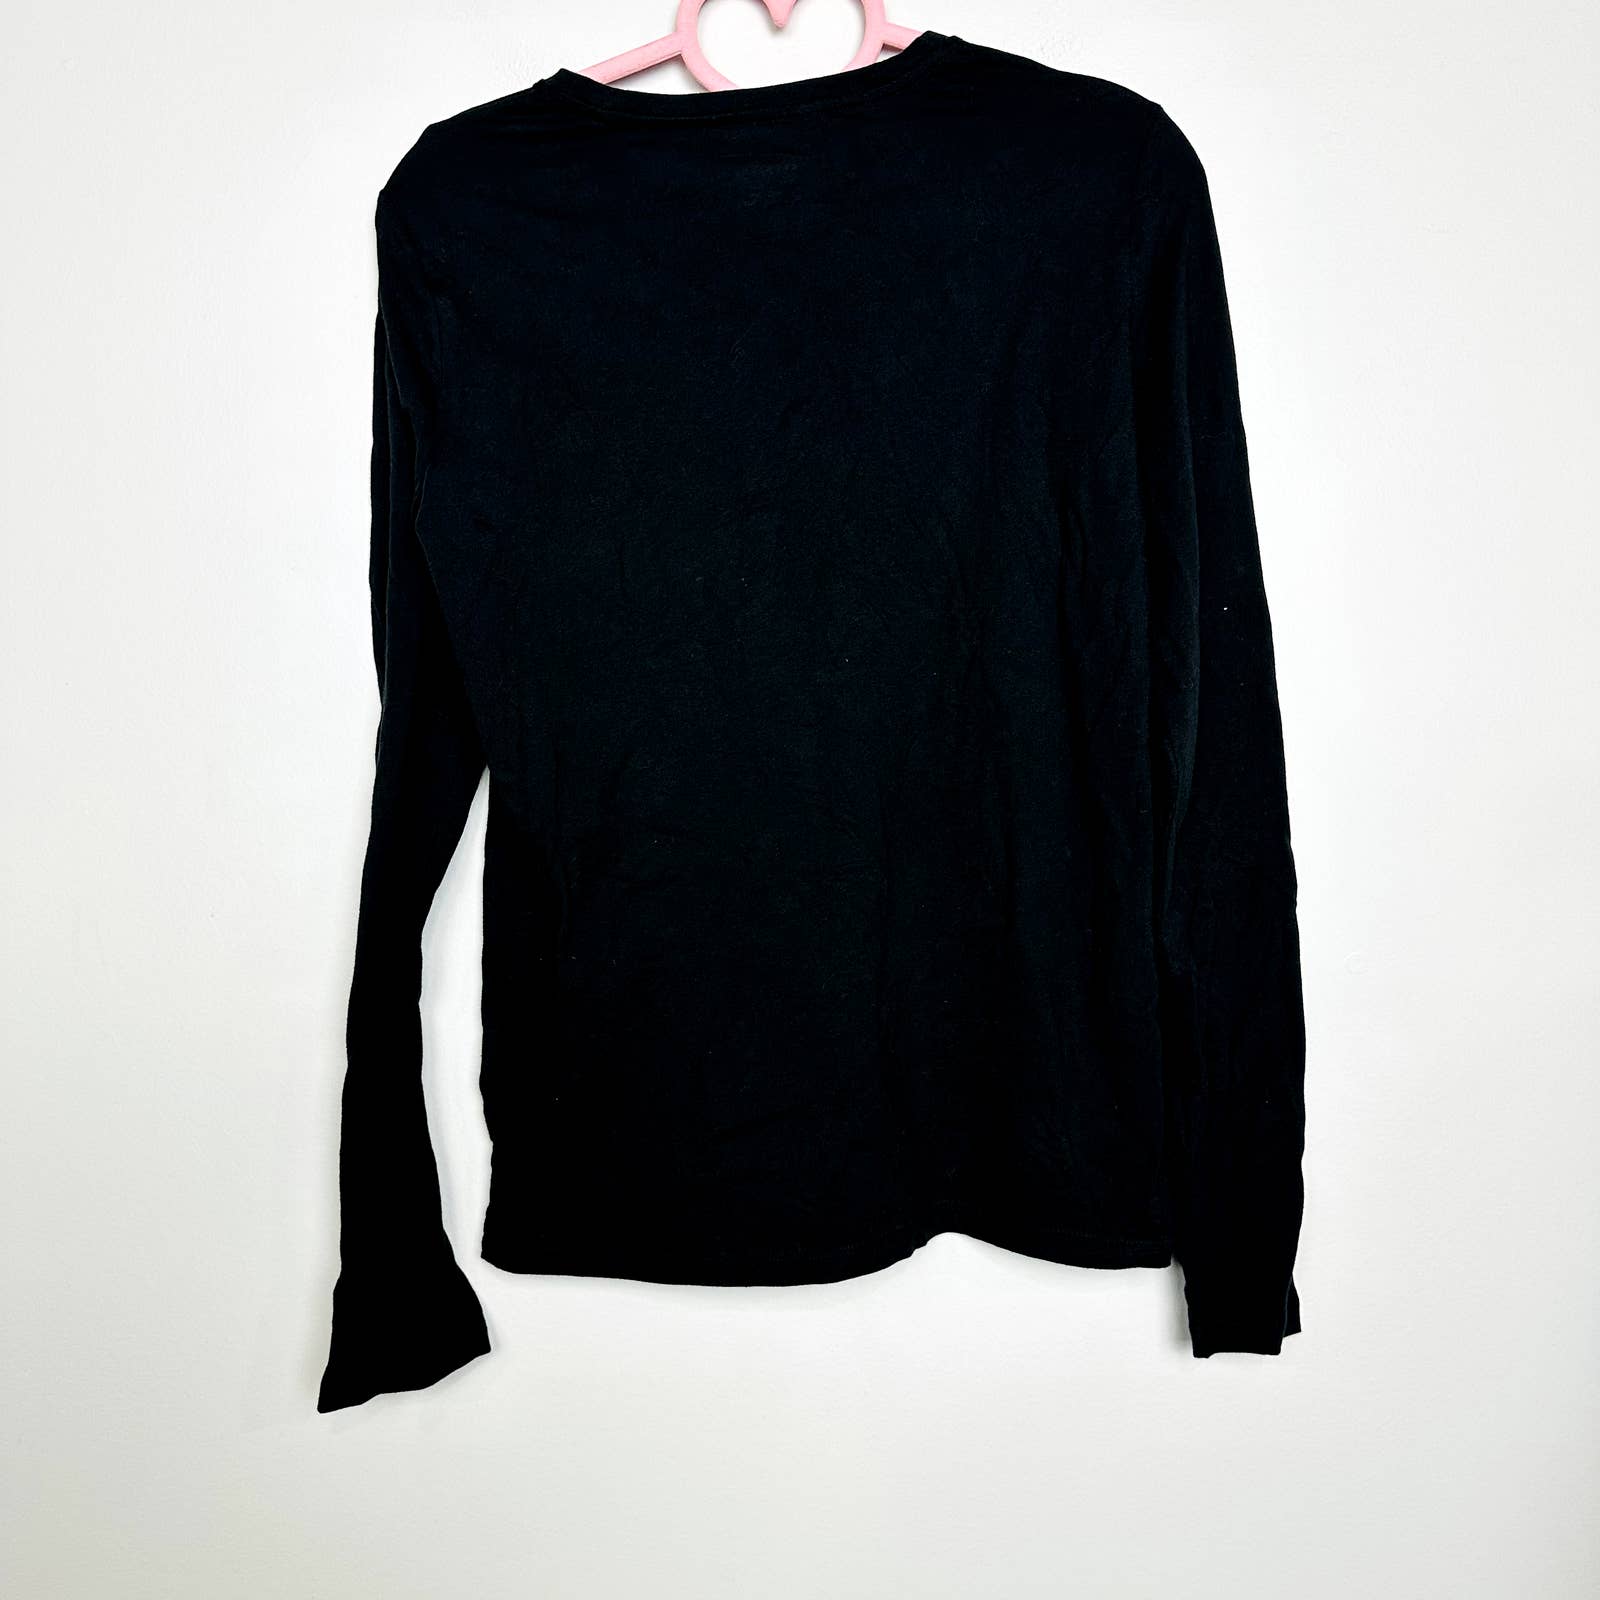 Everlane NWOT The Organic Cotton Long Sleeve Crew Neck Pullover Top Black Small